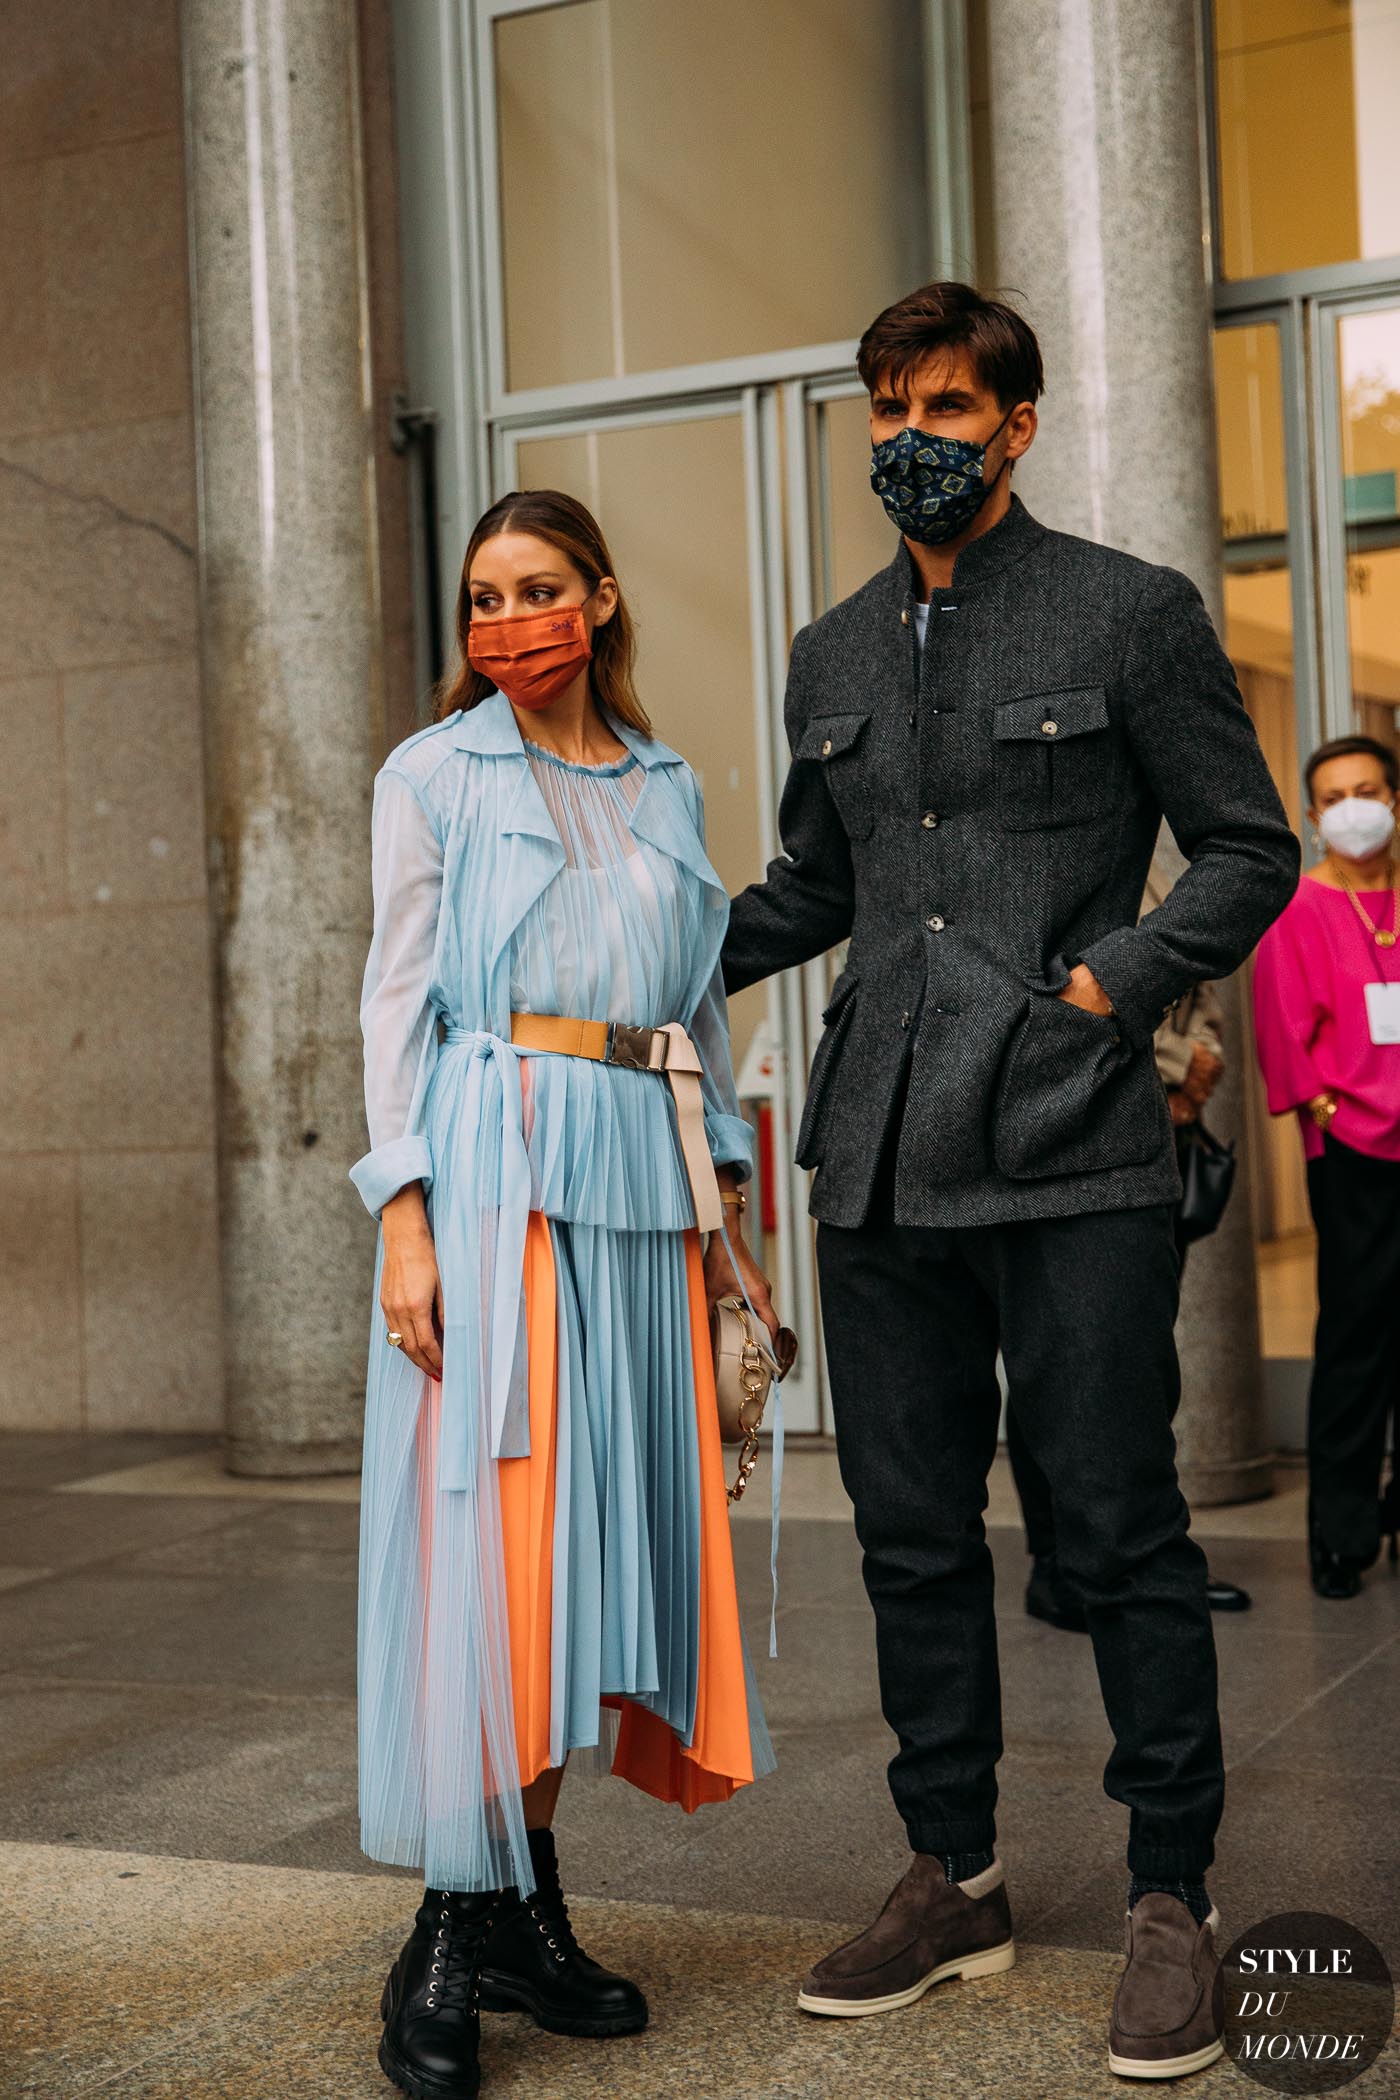 Milan SS 2021 Street Style: Olivia Palermo and Johannes ...